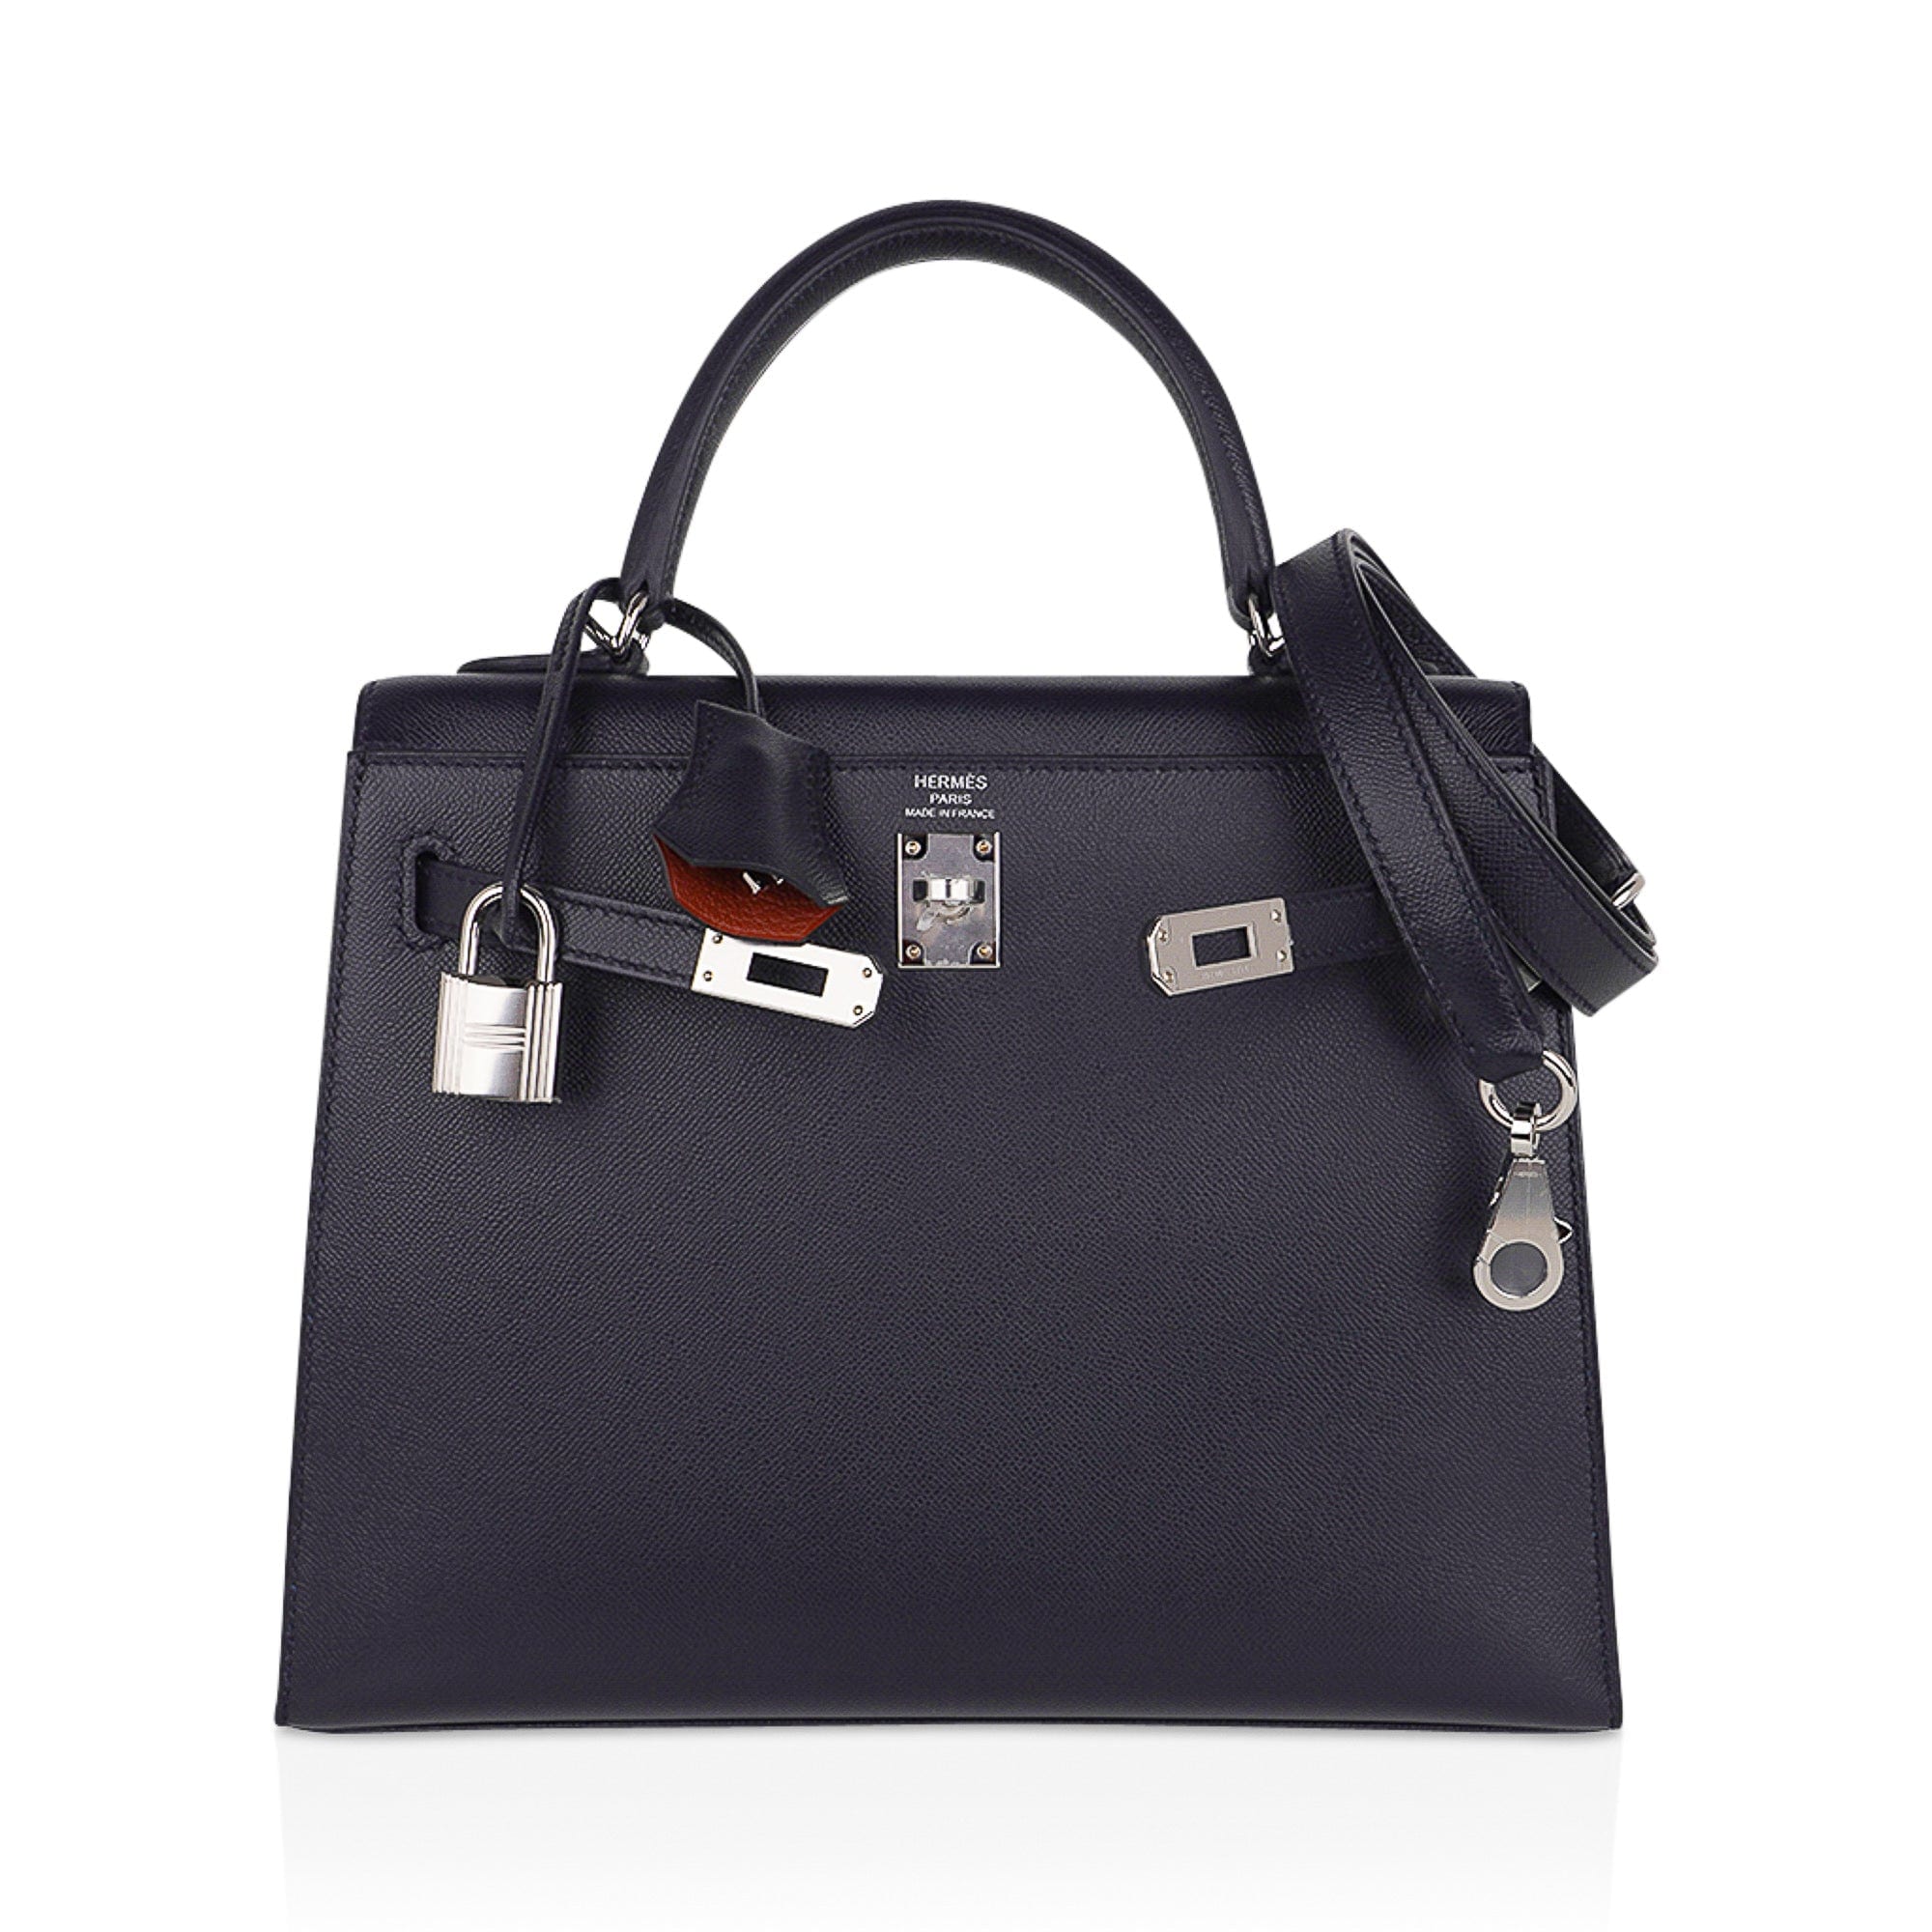 Hermes Kelly 28 Retourne, What Fits, 25 or 28?, Retourne or Sellier?